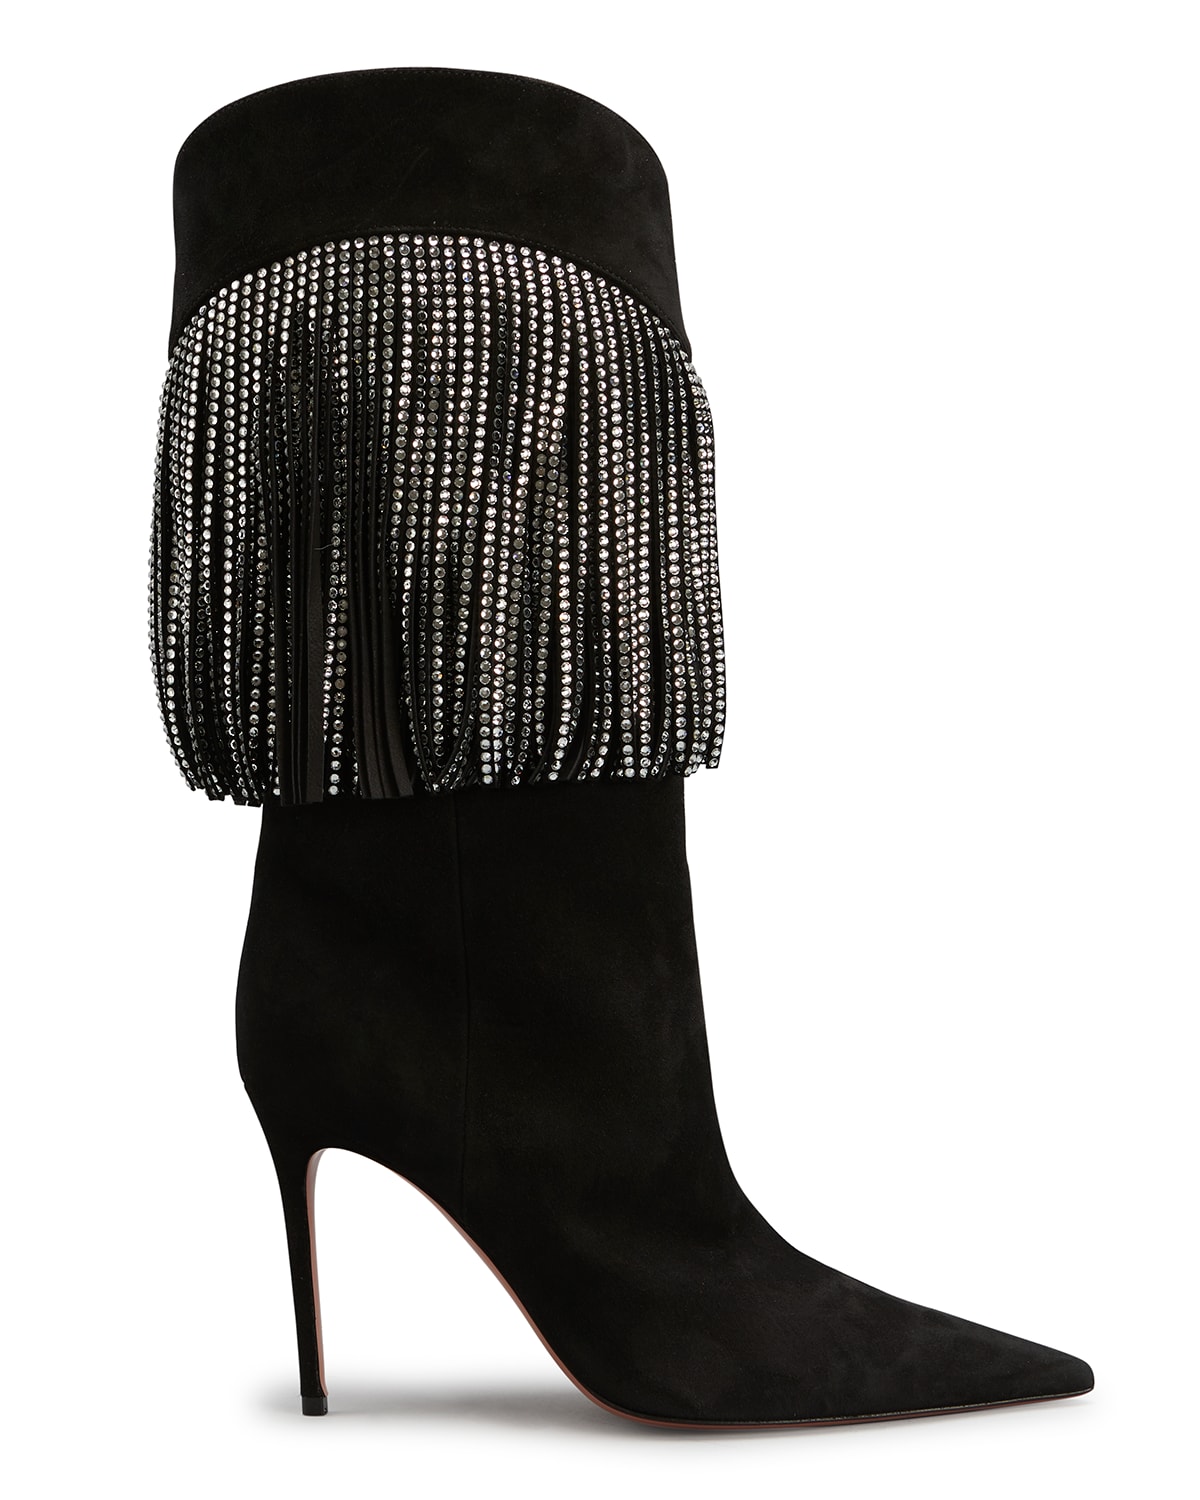 Lily Crystal Fringe Stiletto Boots